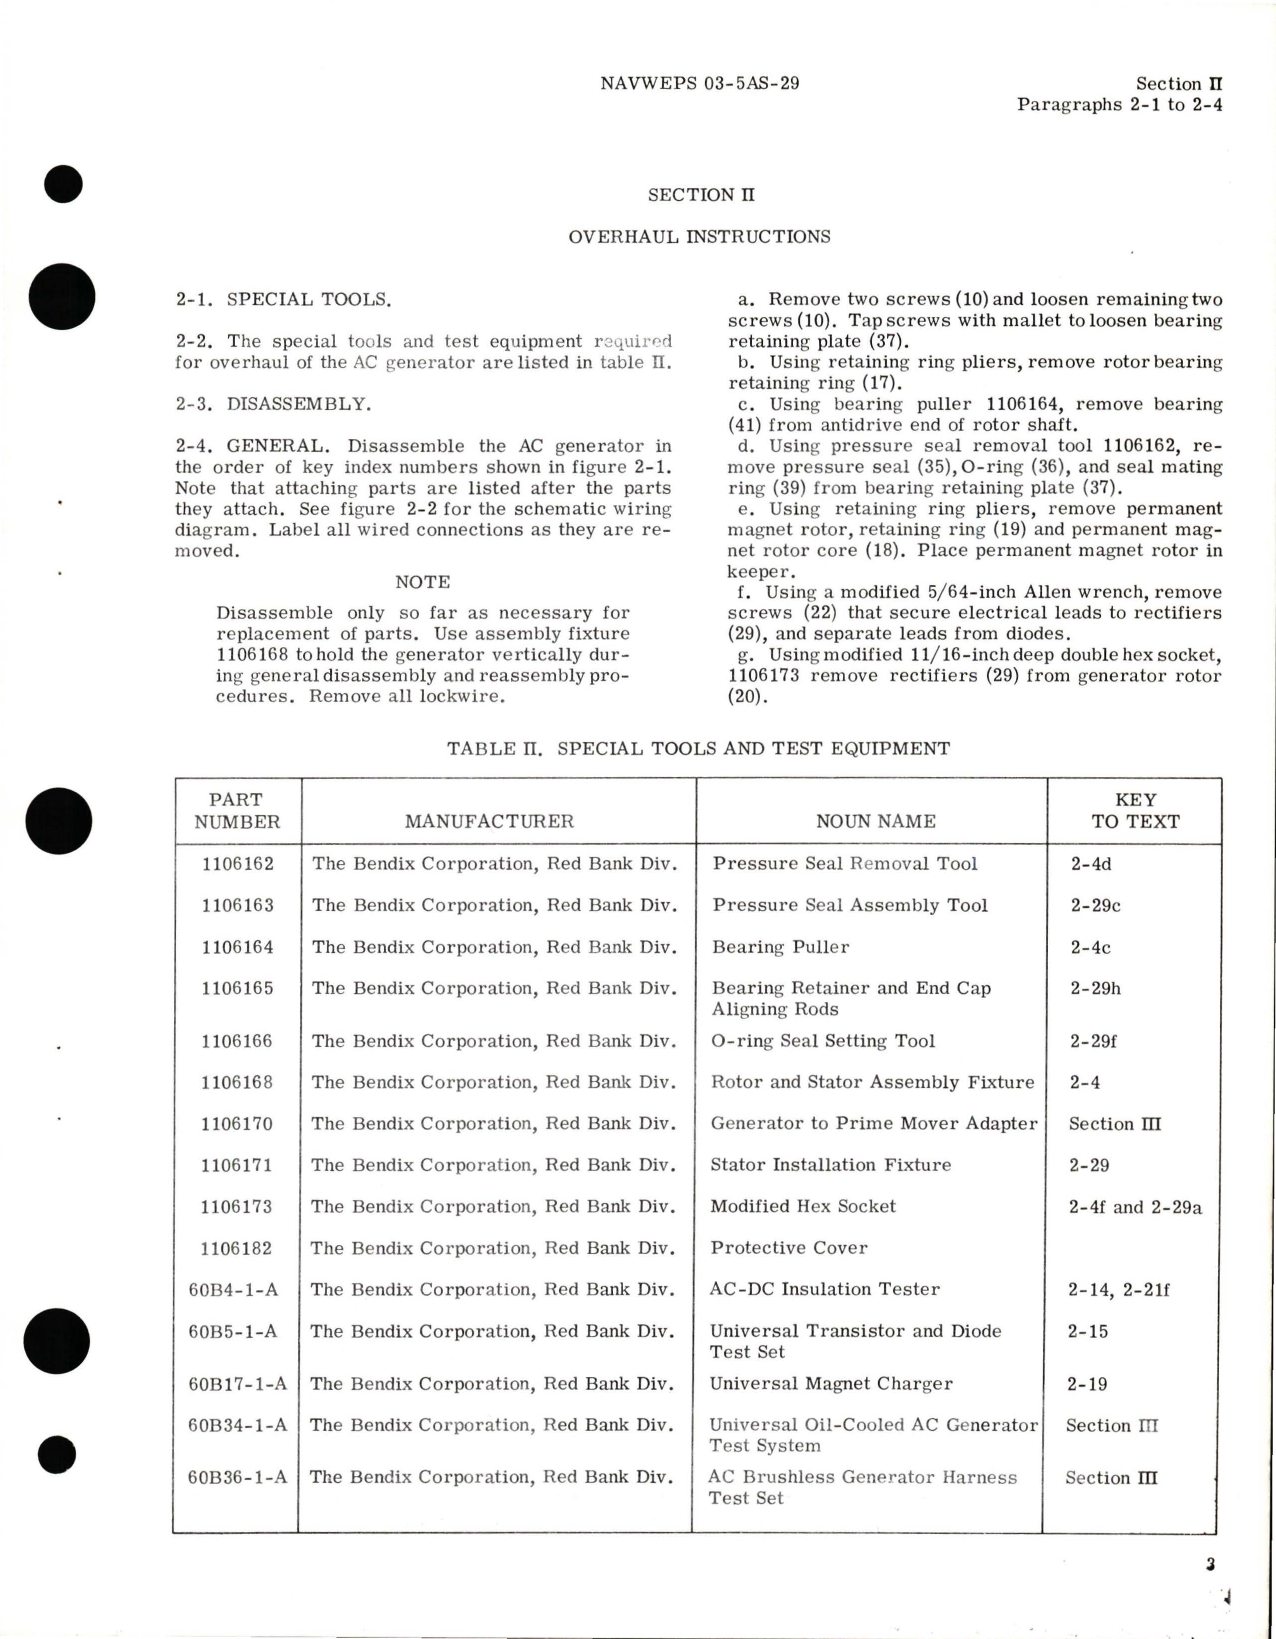 Sample page 7 from AirCorps Library document: Overhaul Instructions for AC Generator - Types 28B187-4-A and 28B187-6-A